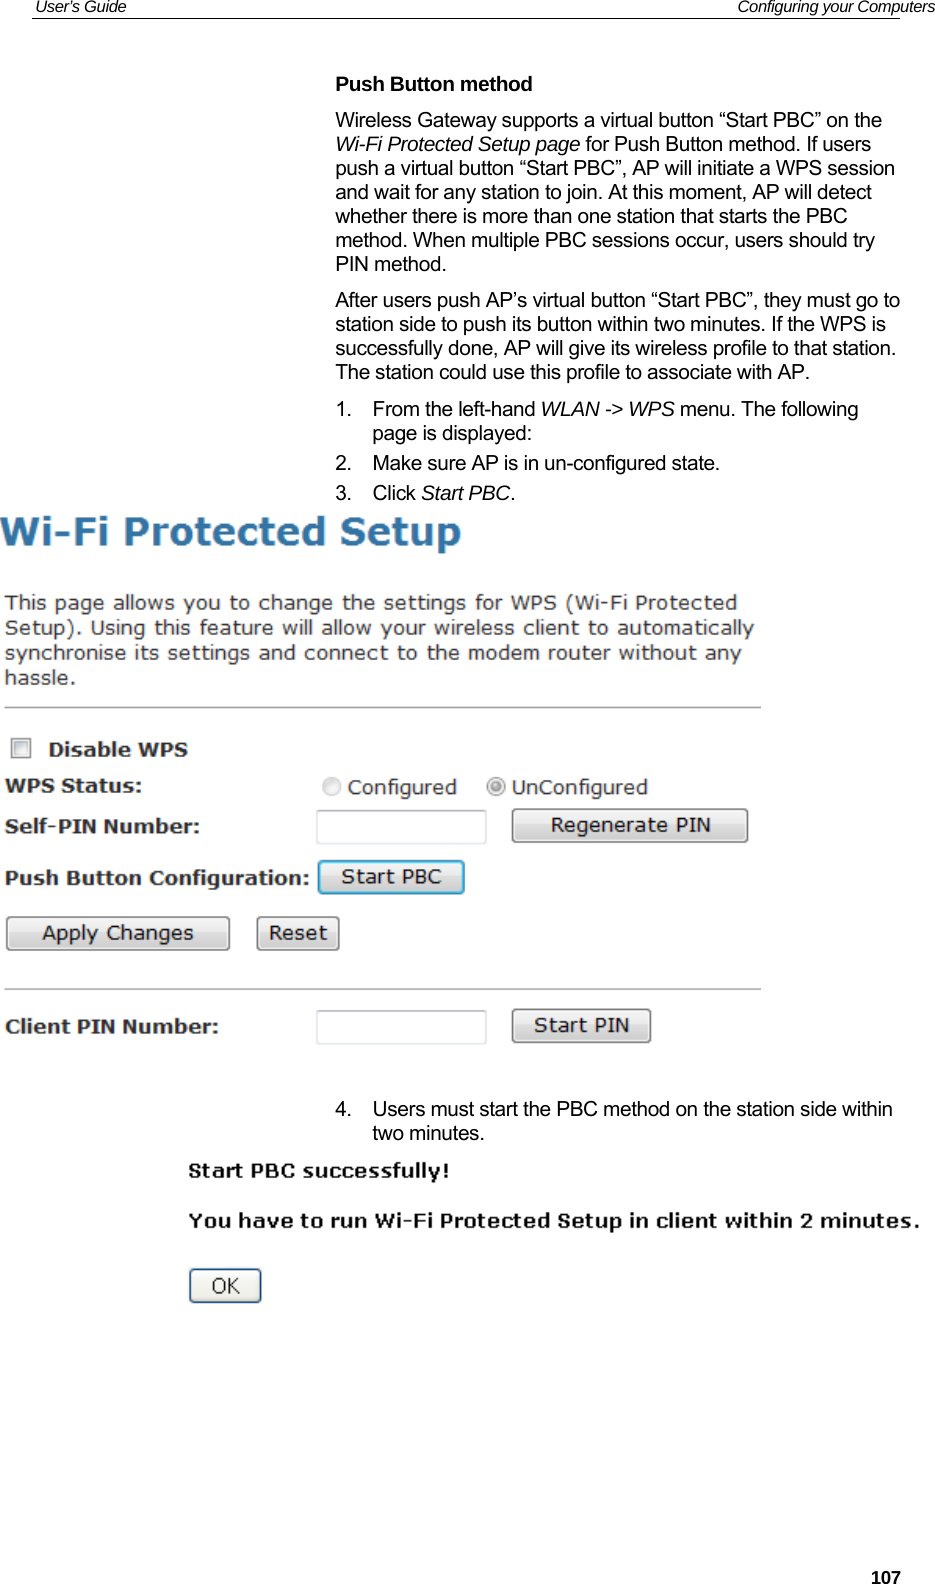 User’s Guide   Configuring your Computers Push Button method  Wireless Gateway supports a virtual button “Start PBC” on the Wi-Fi Protected Setup page for Push Button method. If users push a virtual button “Start PBC”, AP will initiate a WPS session and wait for any station to join. At this moment, AP will detect whether there is more than one station that starts the PBC method. When multiple PBC sessions occur, users should try PIN method. After users push AP’s virtual button “Start PBC”, they must go to station side to push its button within two minutes. If the WPS is successfully done, AP will give its wireless profile to that station. The station could use this profile to associate with AP. 1.  From the left-hand WLAN -&gt; WPS menu. The following page is displayed: 2.  Make sure AP is in un-configured state. 3. Click Start PBC.   4.  Users must start the PBC method on the station side within two minutes.        107